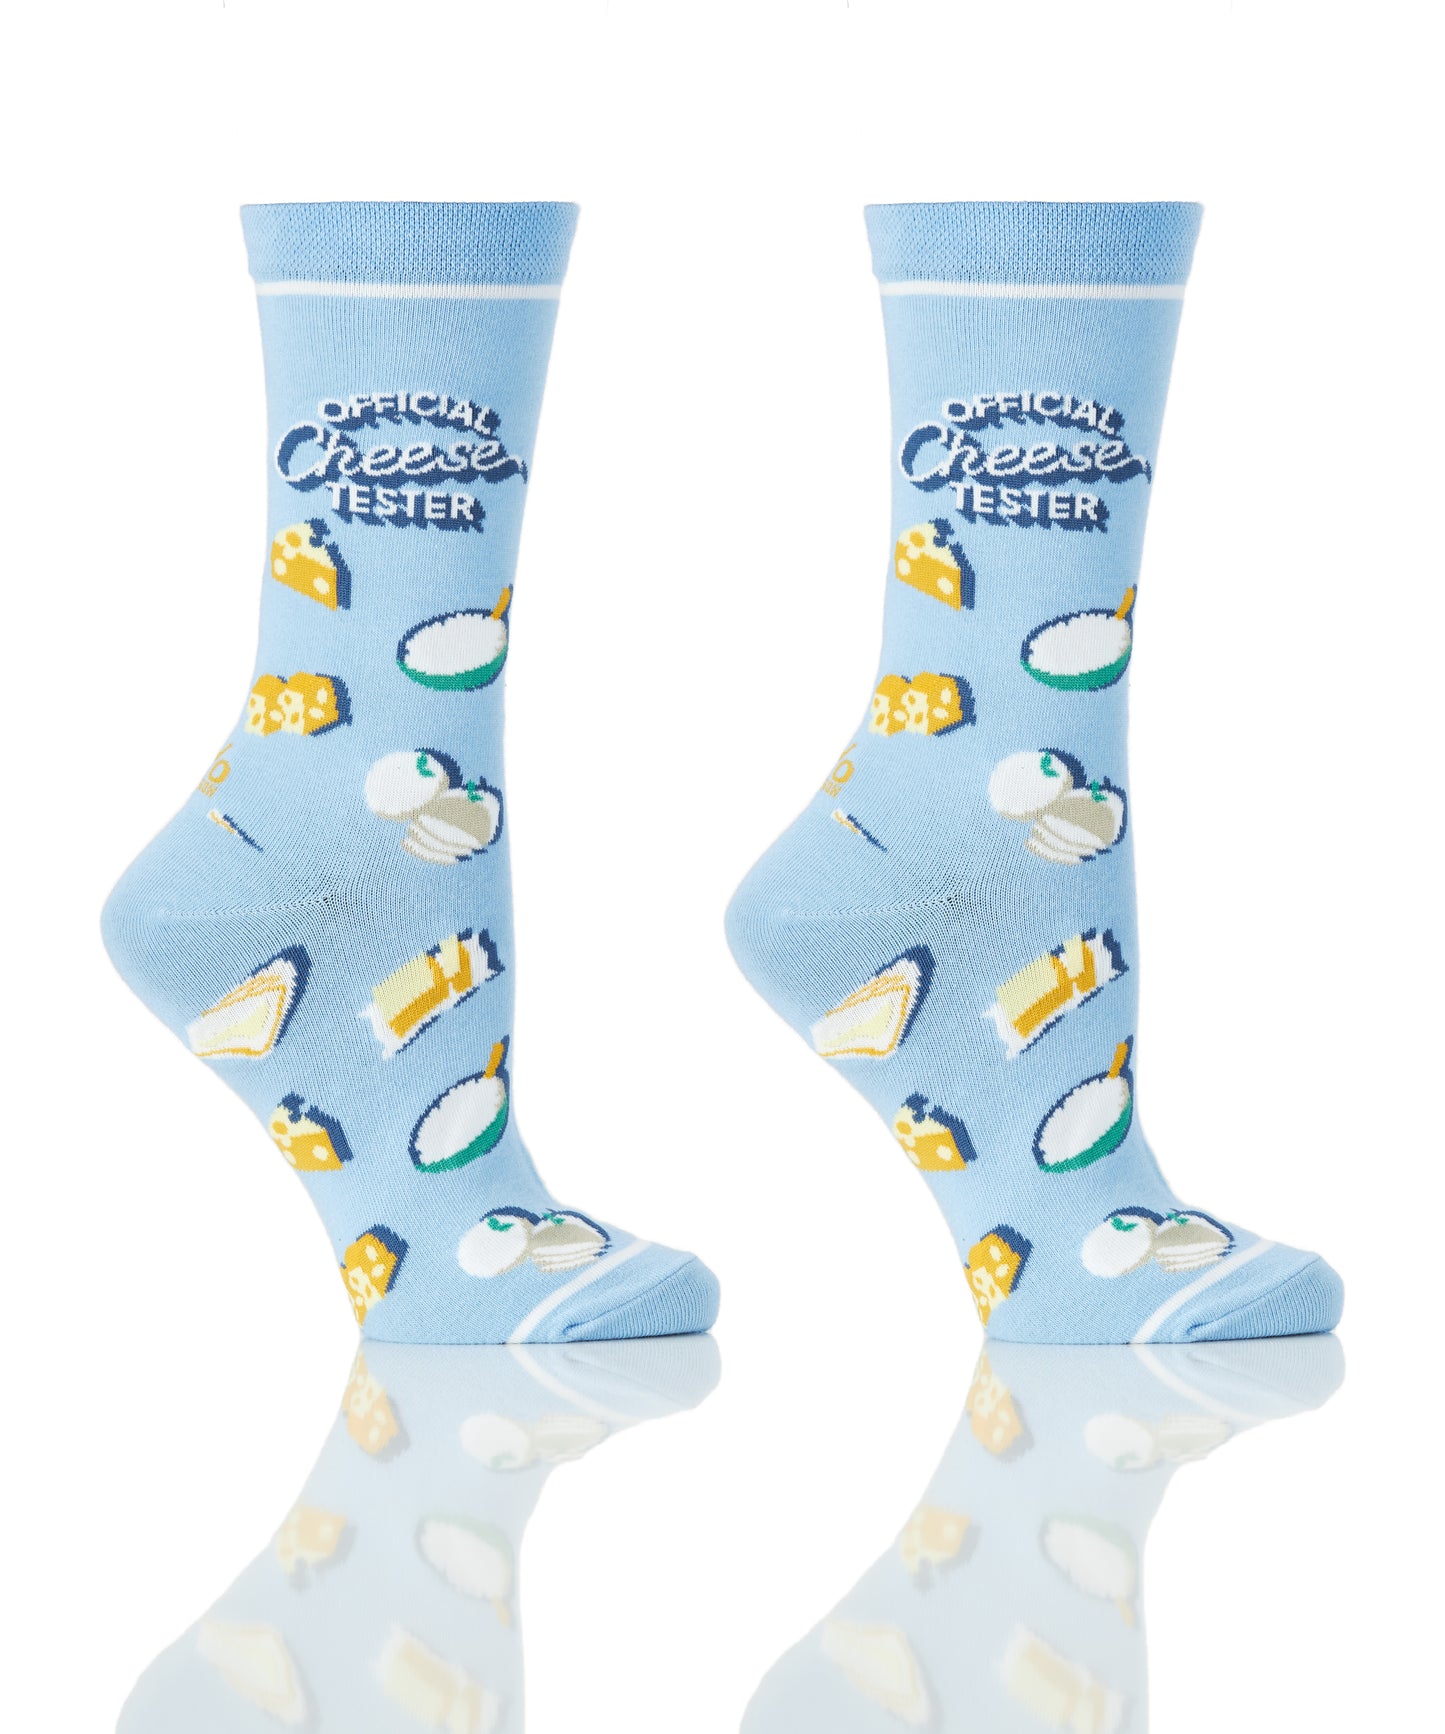 Women's Crew Socks - Official Cheese Tester